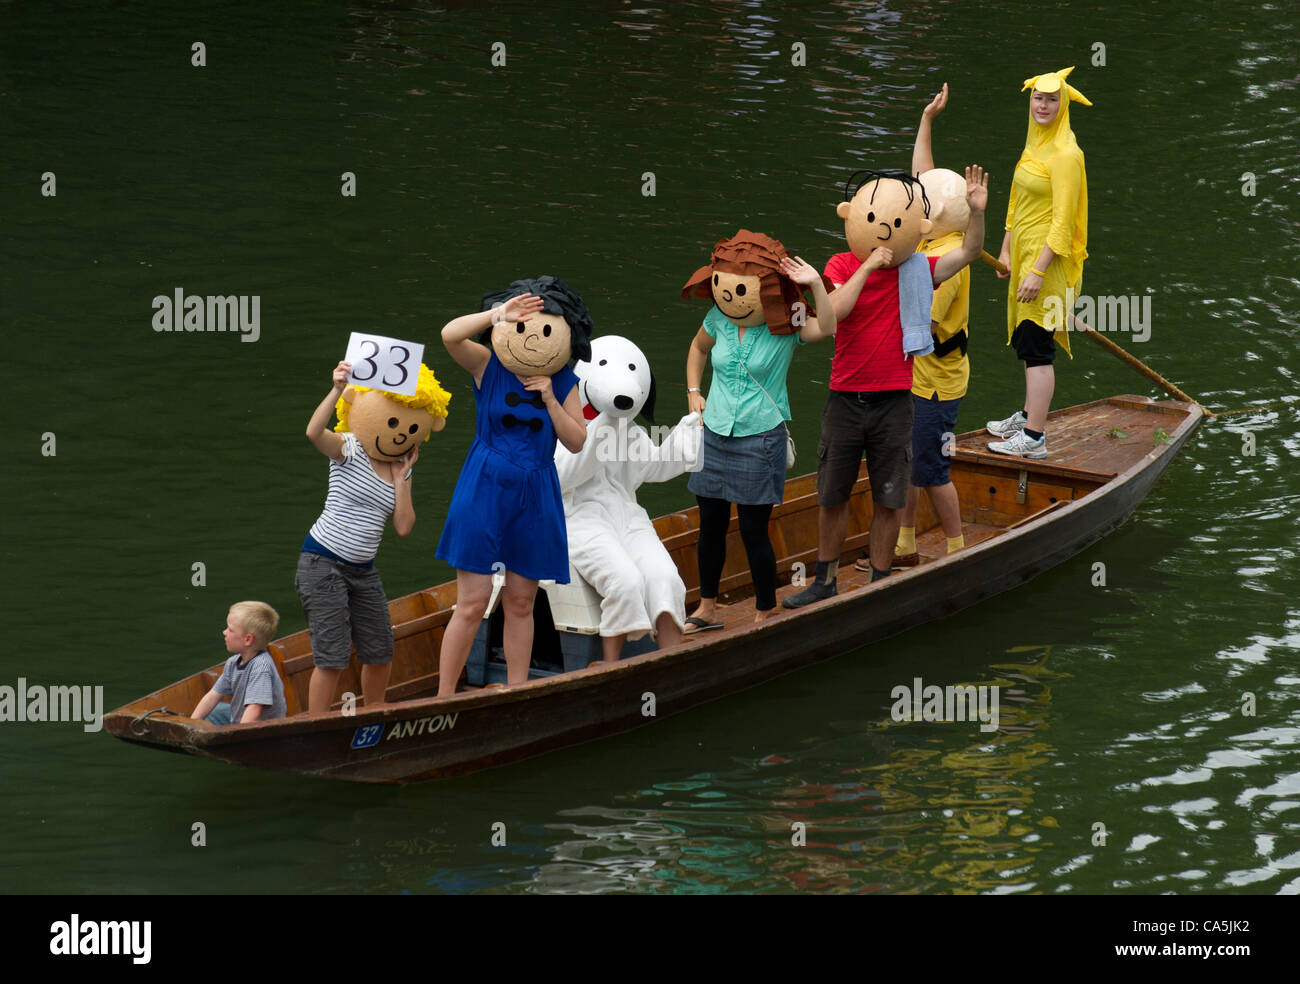 07.06.2012. Tuebingen, Germany.  People dressed as characters from the comic strip Peanuts take part in the fancy dress parade of the punt boat race (Stocherkahnrennen) on the river Neckar in tuebingen, Germany, 07 June 2012. Around 50 punt boats competed in this year's traditional punt boat race. Stock Photo